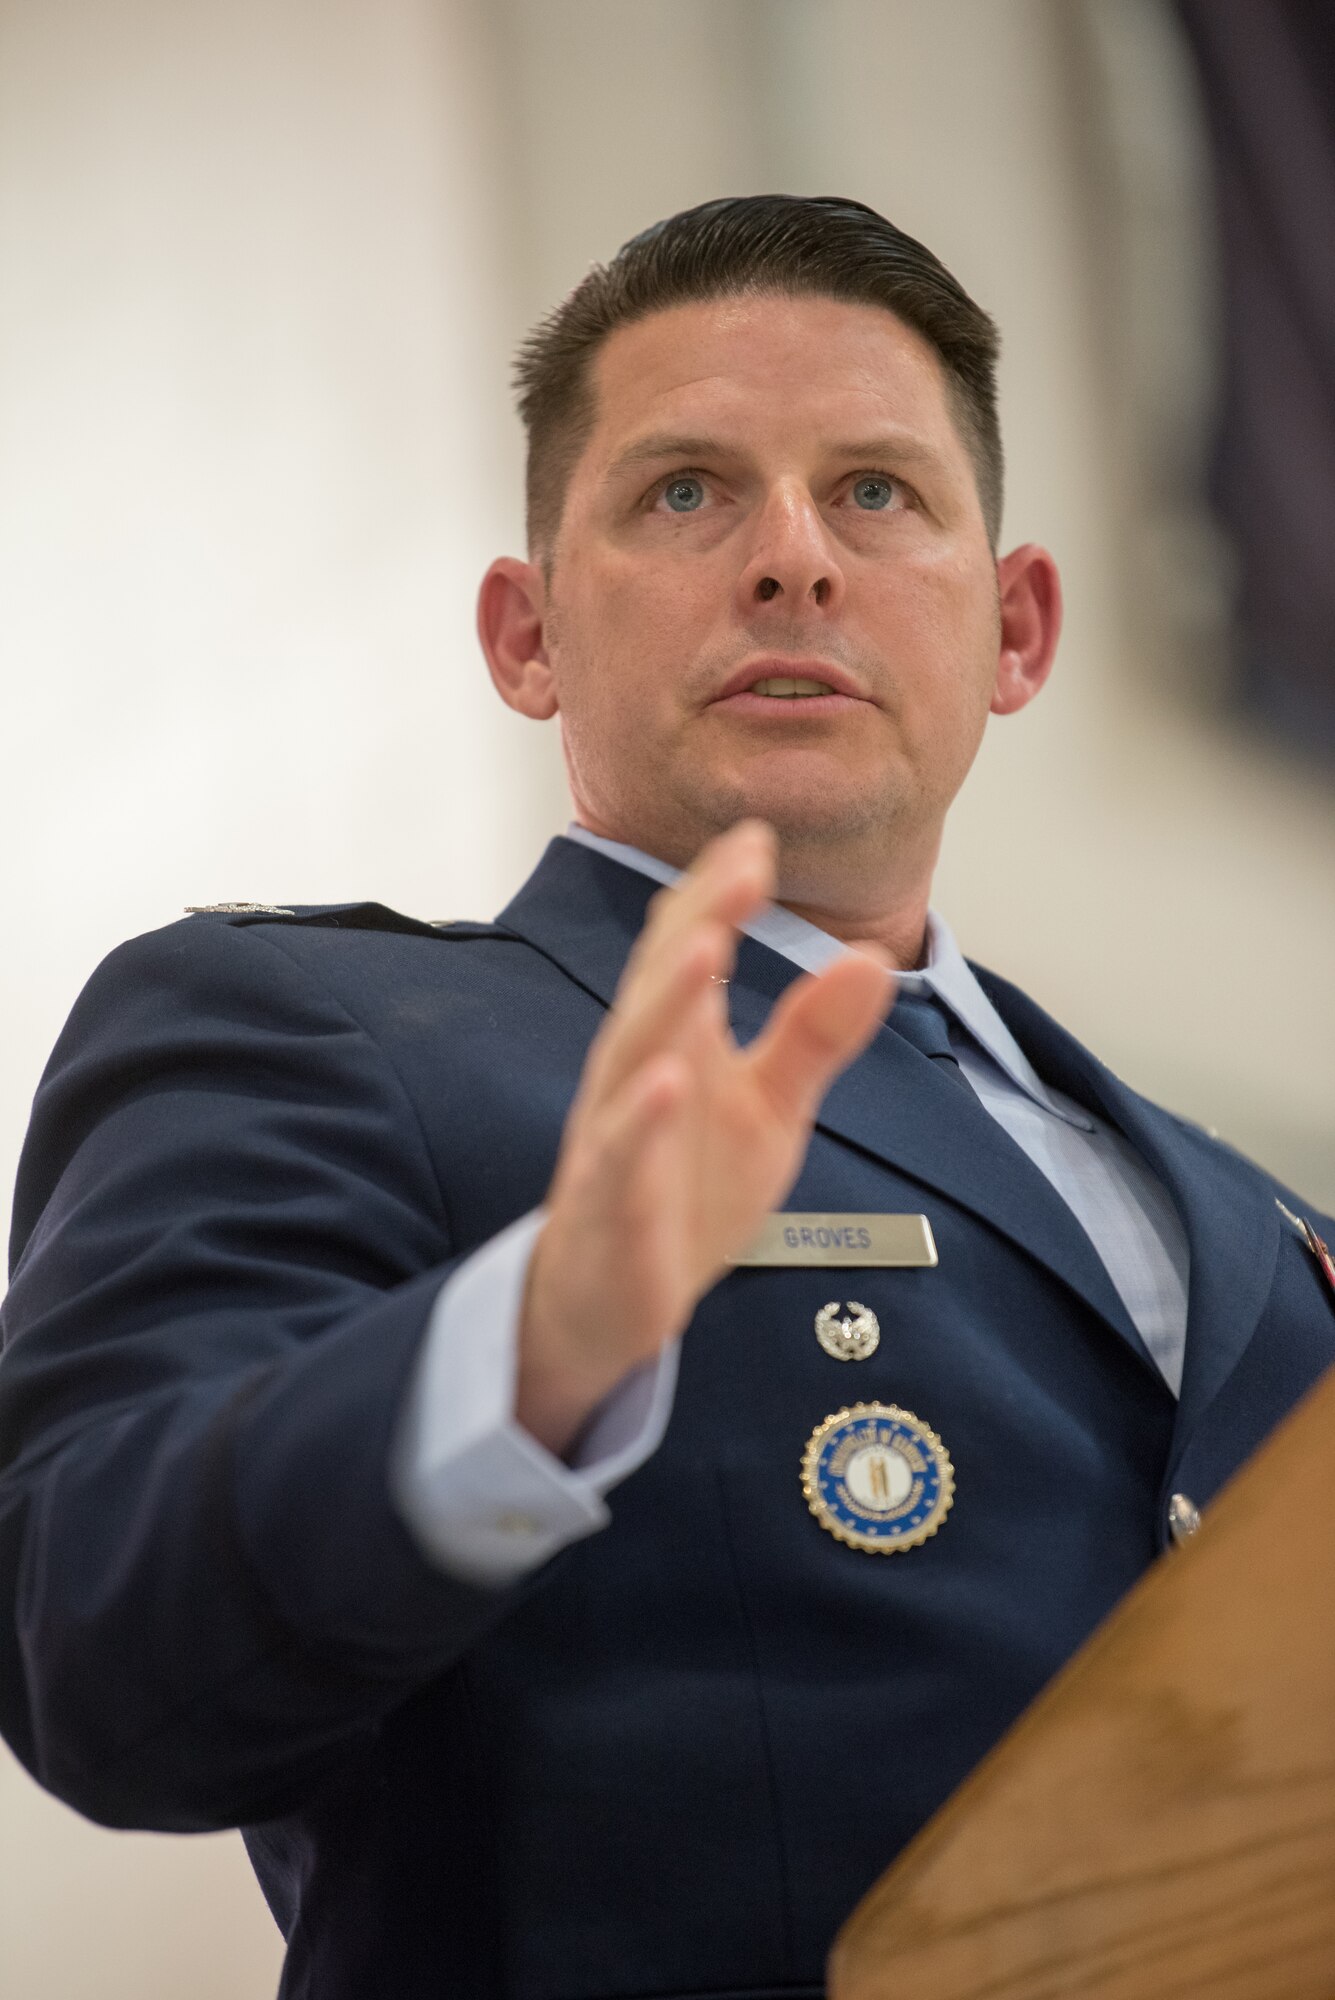 Col. Ashley Groves, incoming commander of the 123rd Maintenance Group, addresses the crowd during a ceremony at the Kentucky Air National Guard Base in Louisville, Ky., on Dec. 1, 2018. Groves is replacing Col. Ken Dale, who is retiring after more than 38 years of service to the Kentucky Air National Guard. (U.S. Air National Guard photo by Staff Sgt. Joshua Horton)